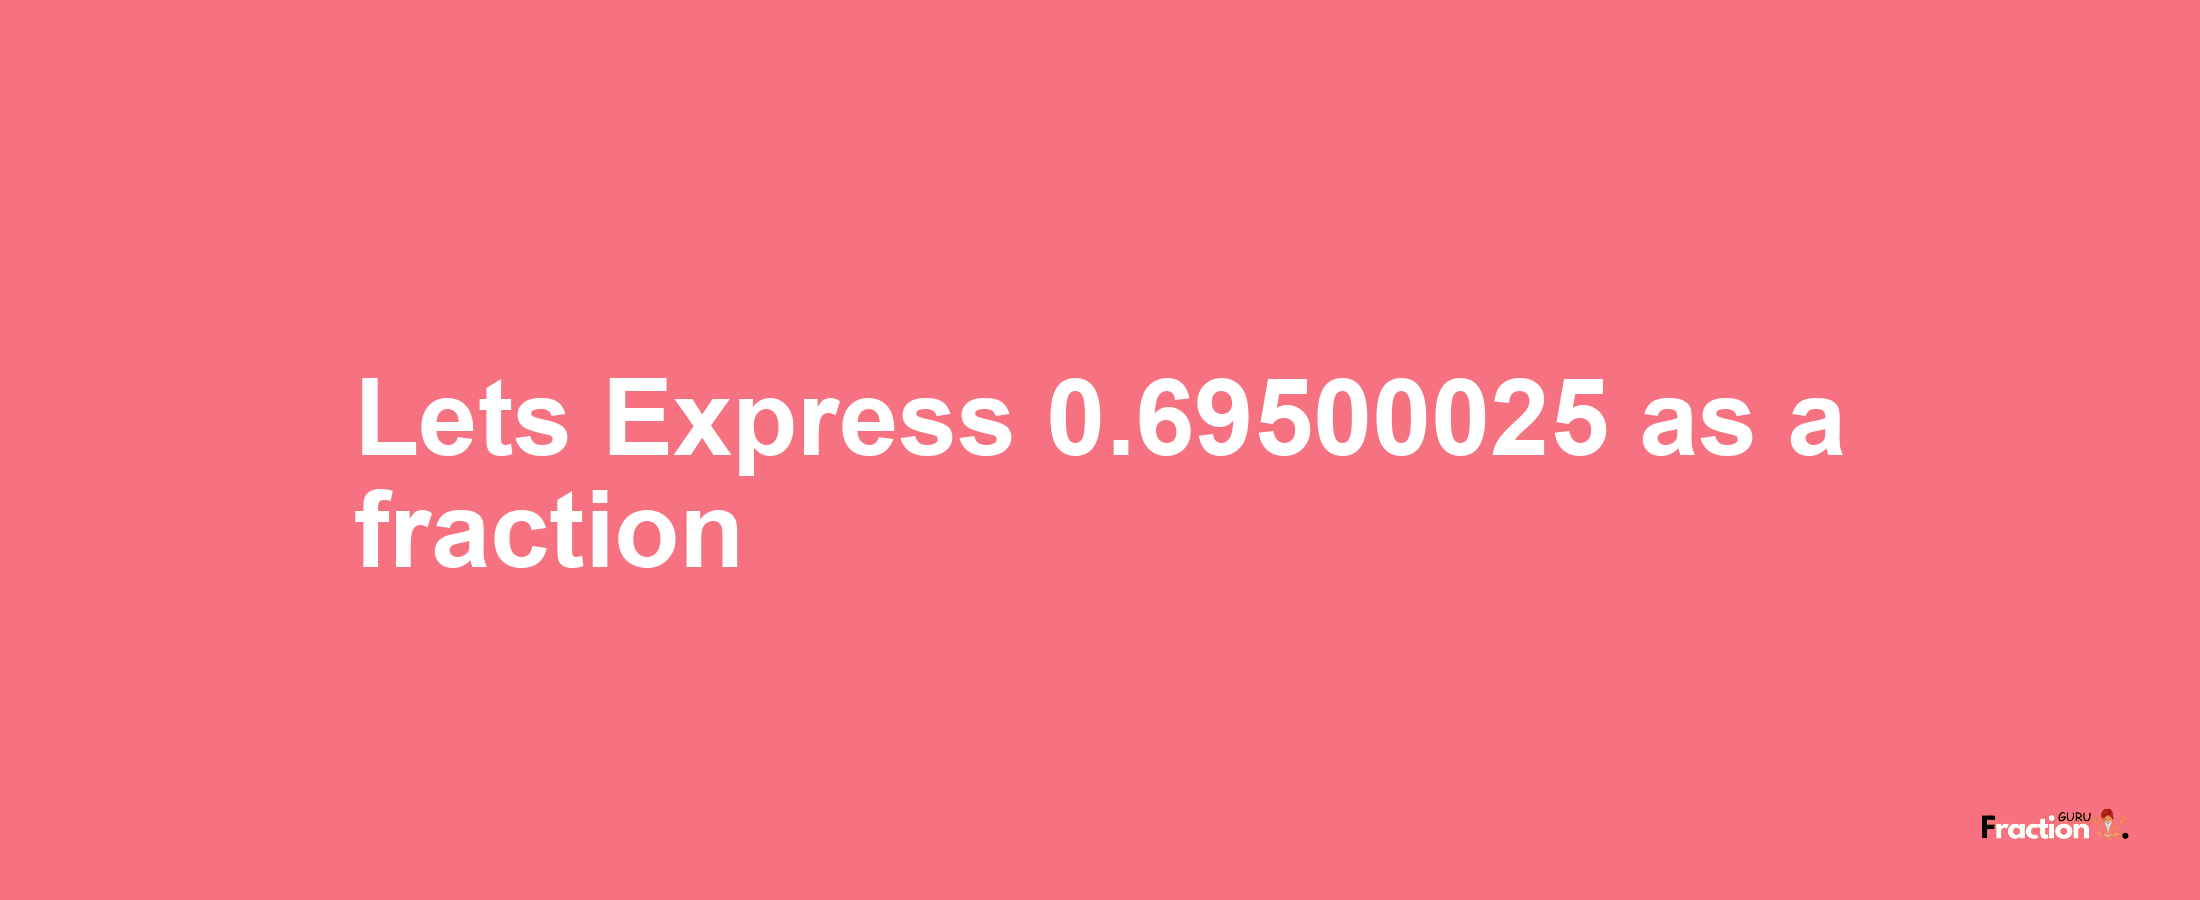 Lets Express 0.69500025 as afraction